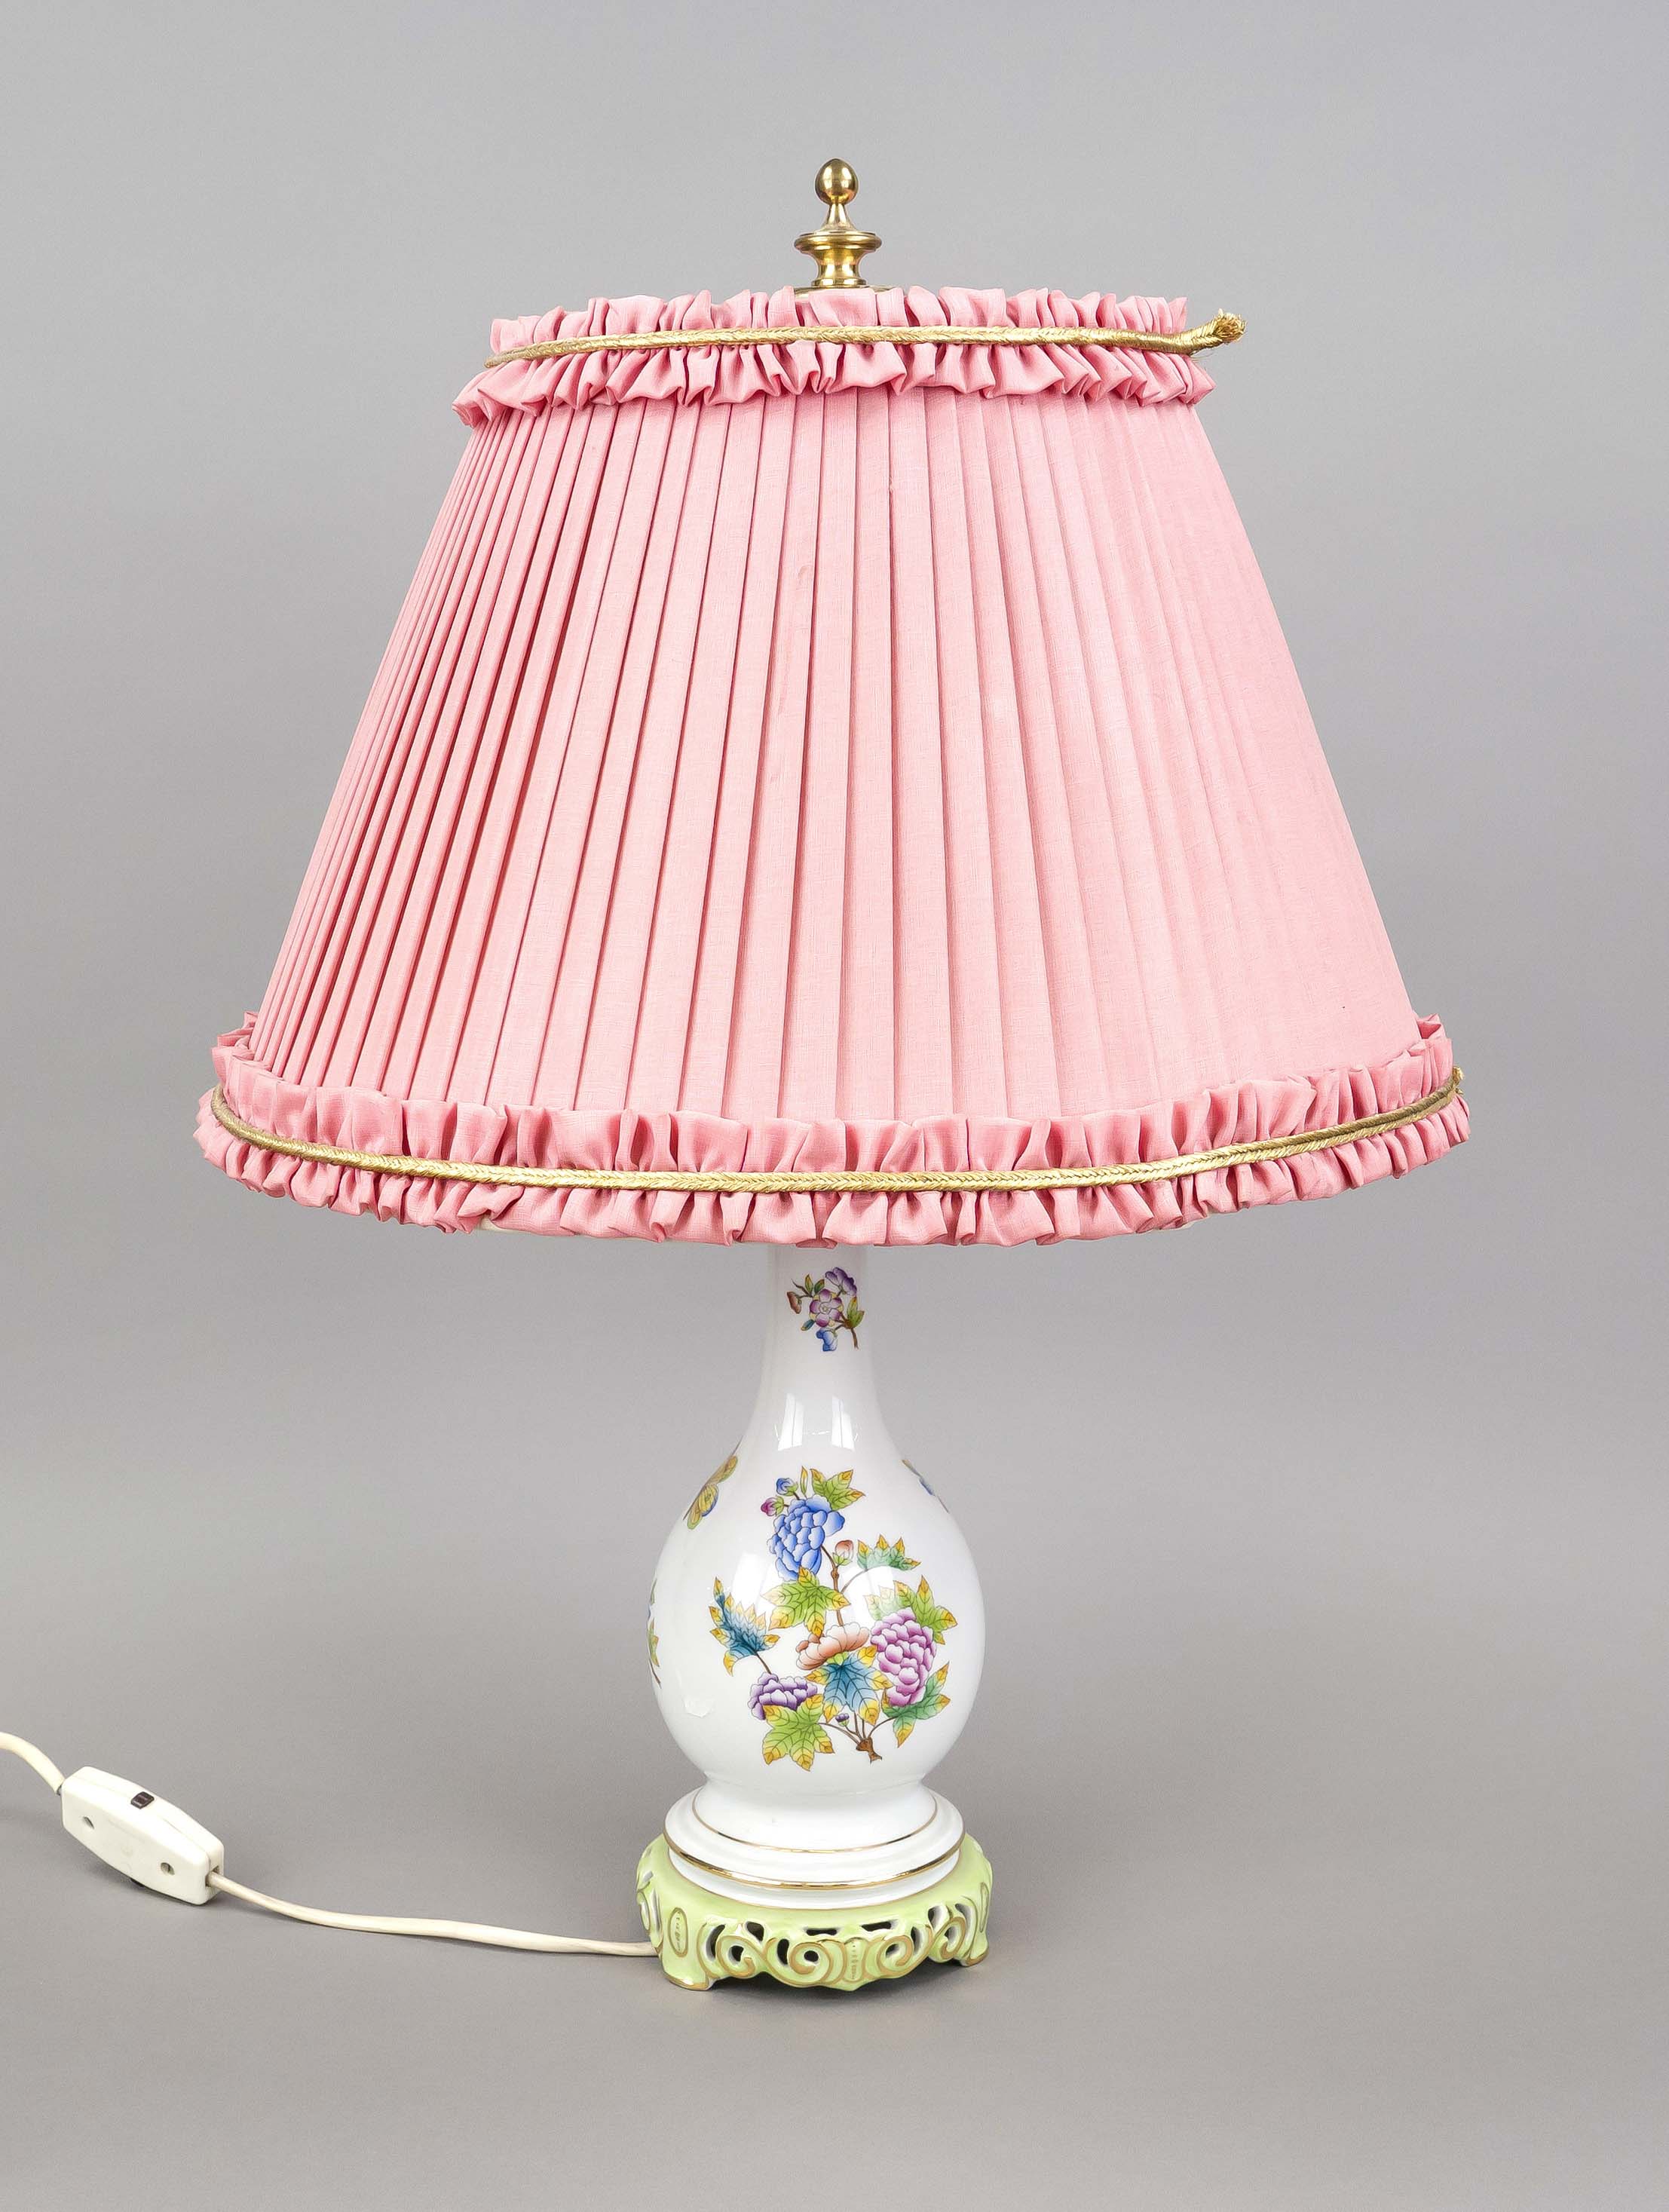 Table lamp, Herend, Hungary, 20th century, baluster vase as lamp base, on openwork stand, Victoria - Image 2 of 2